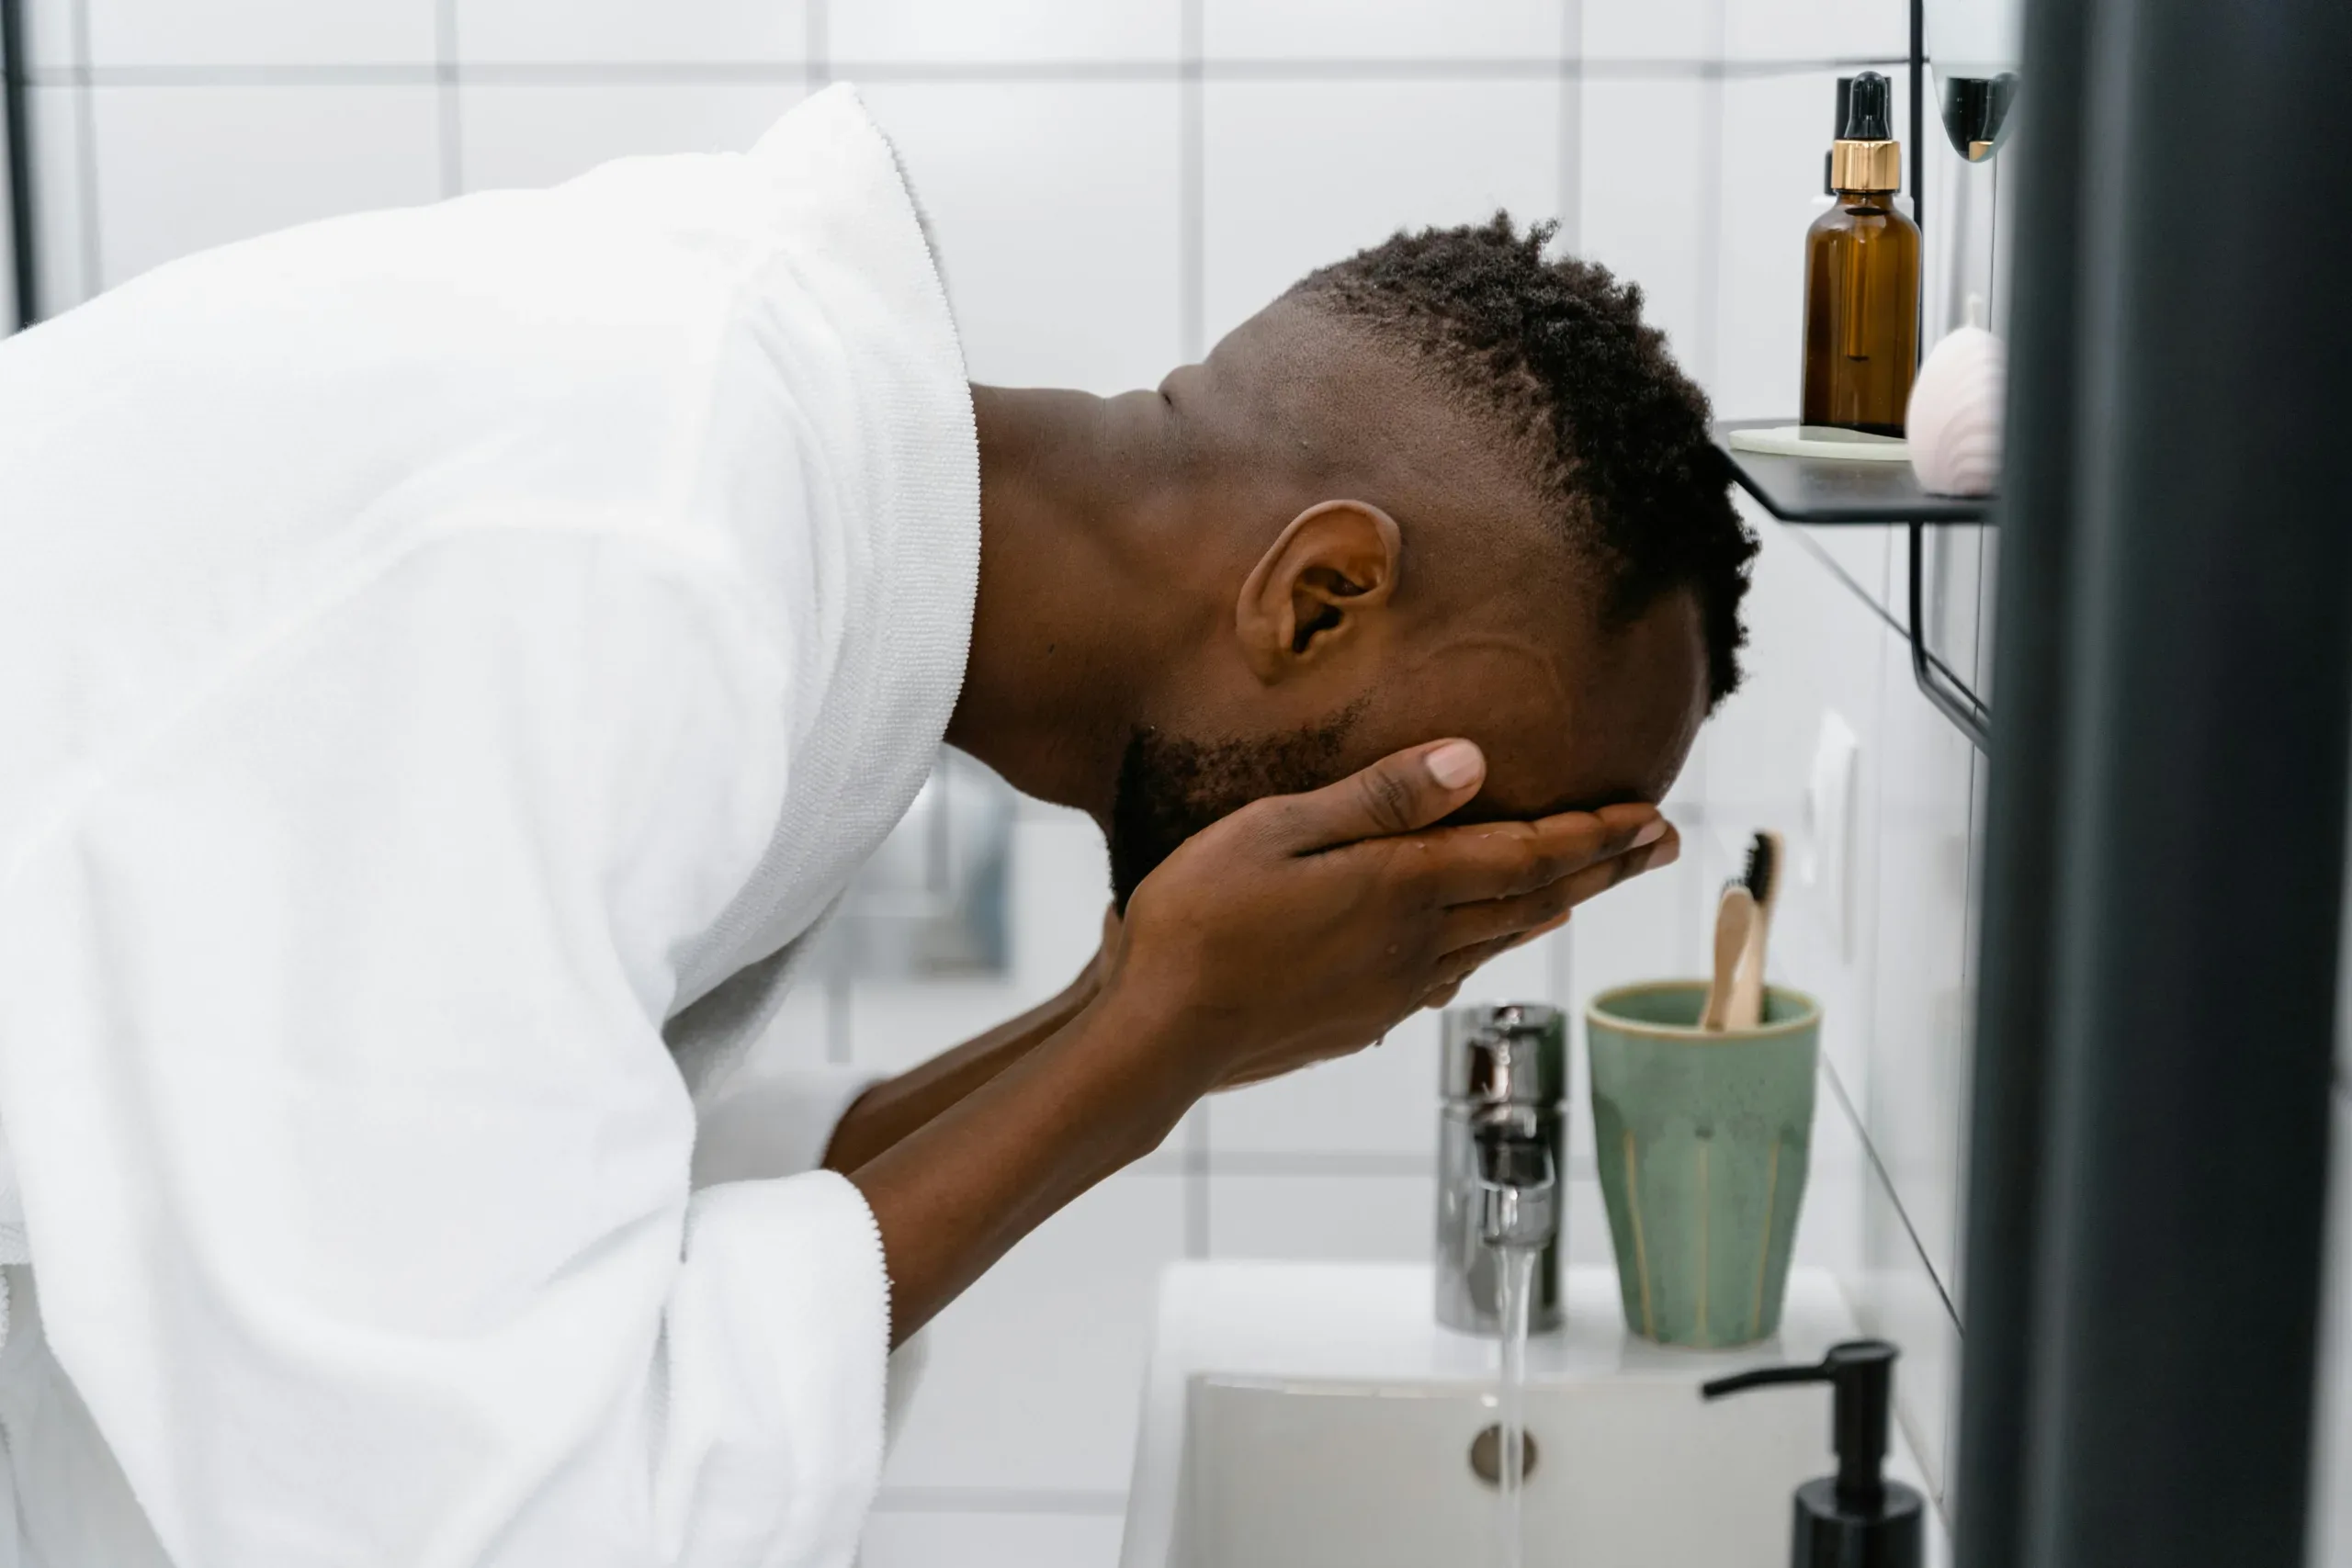 a man wearing a white robe washes his face over a sink